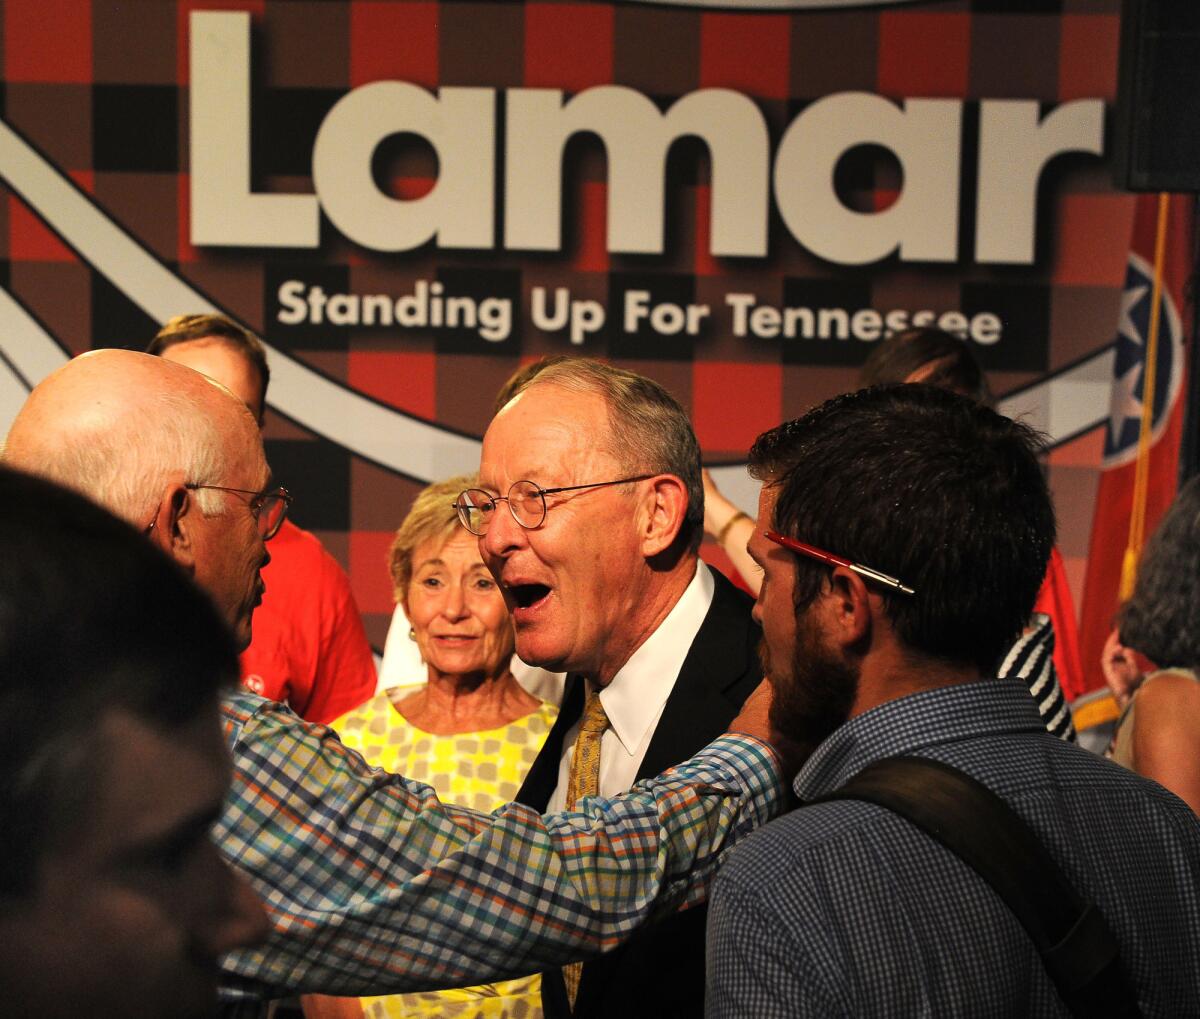 Sen. Lamar Alexander celebrates after defeating Joe Carr in Nashville, Tenn. in August. "To elect a president in 2016, we're going to have to show in 2015 and '16 that the American people can trust Republicans with the government," Lamar said recently.